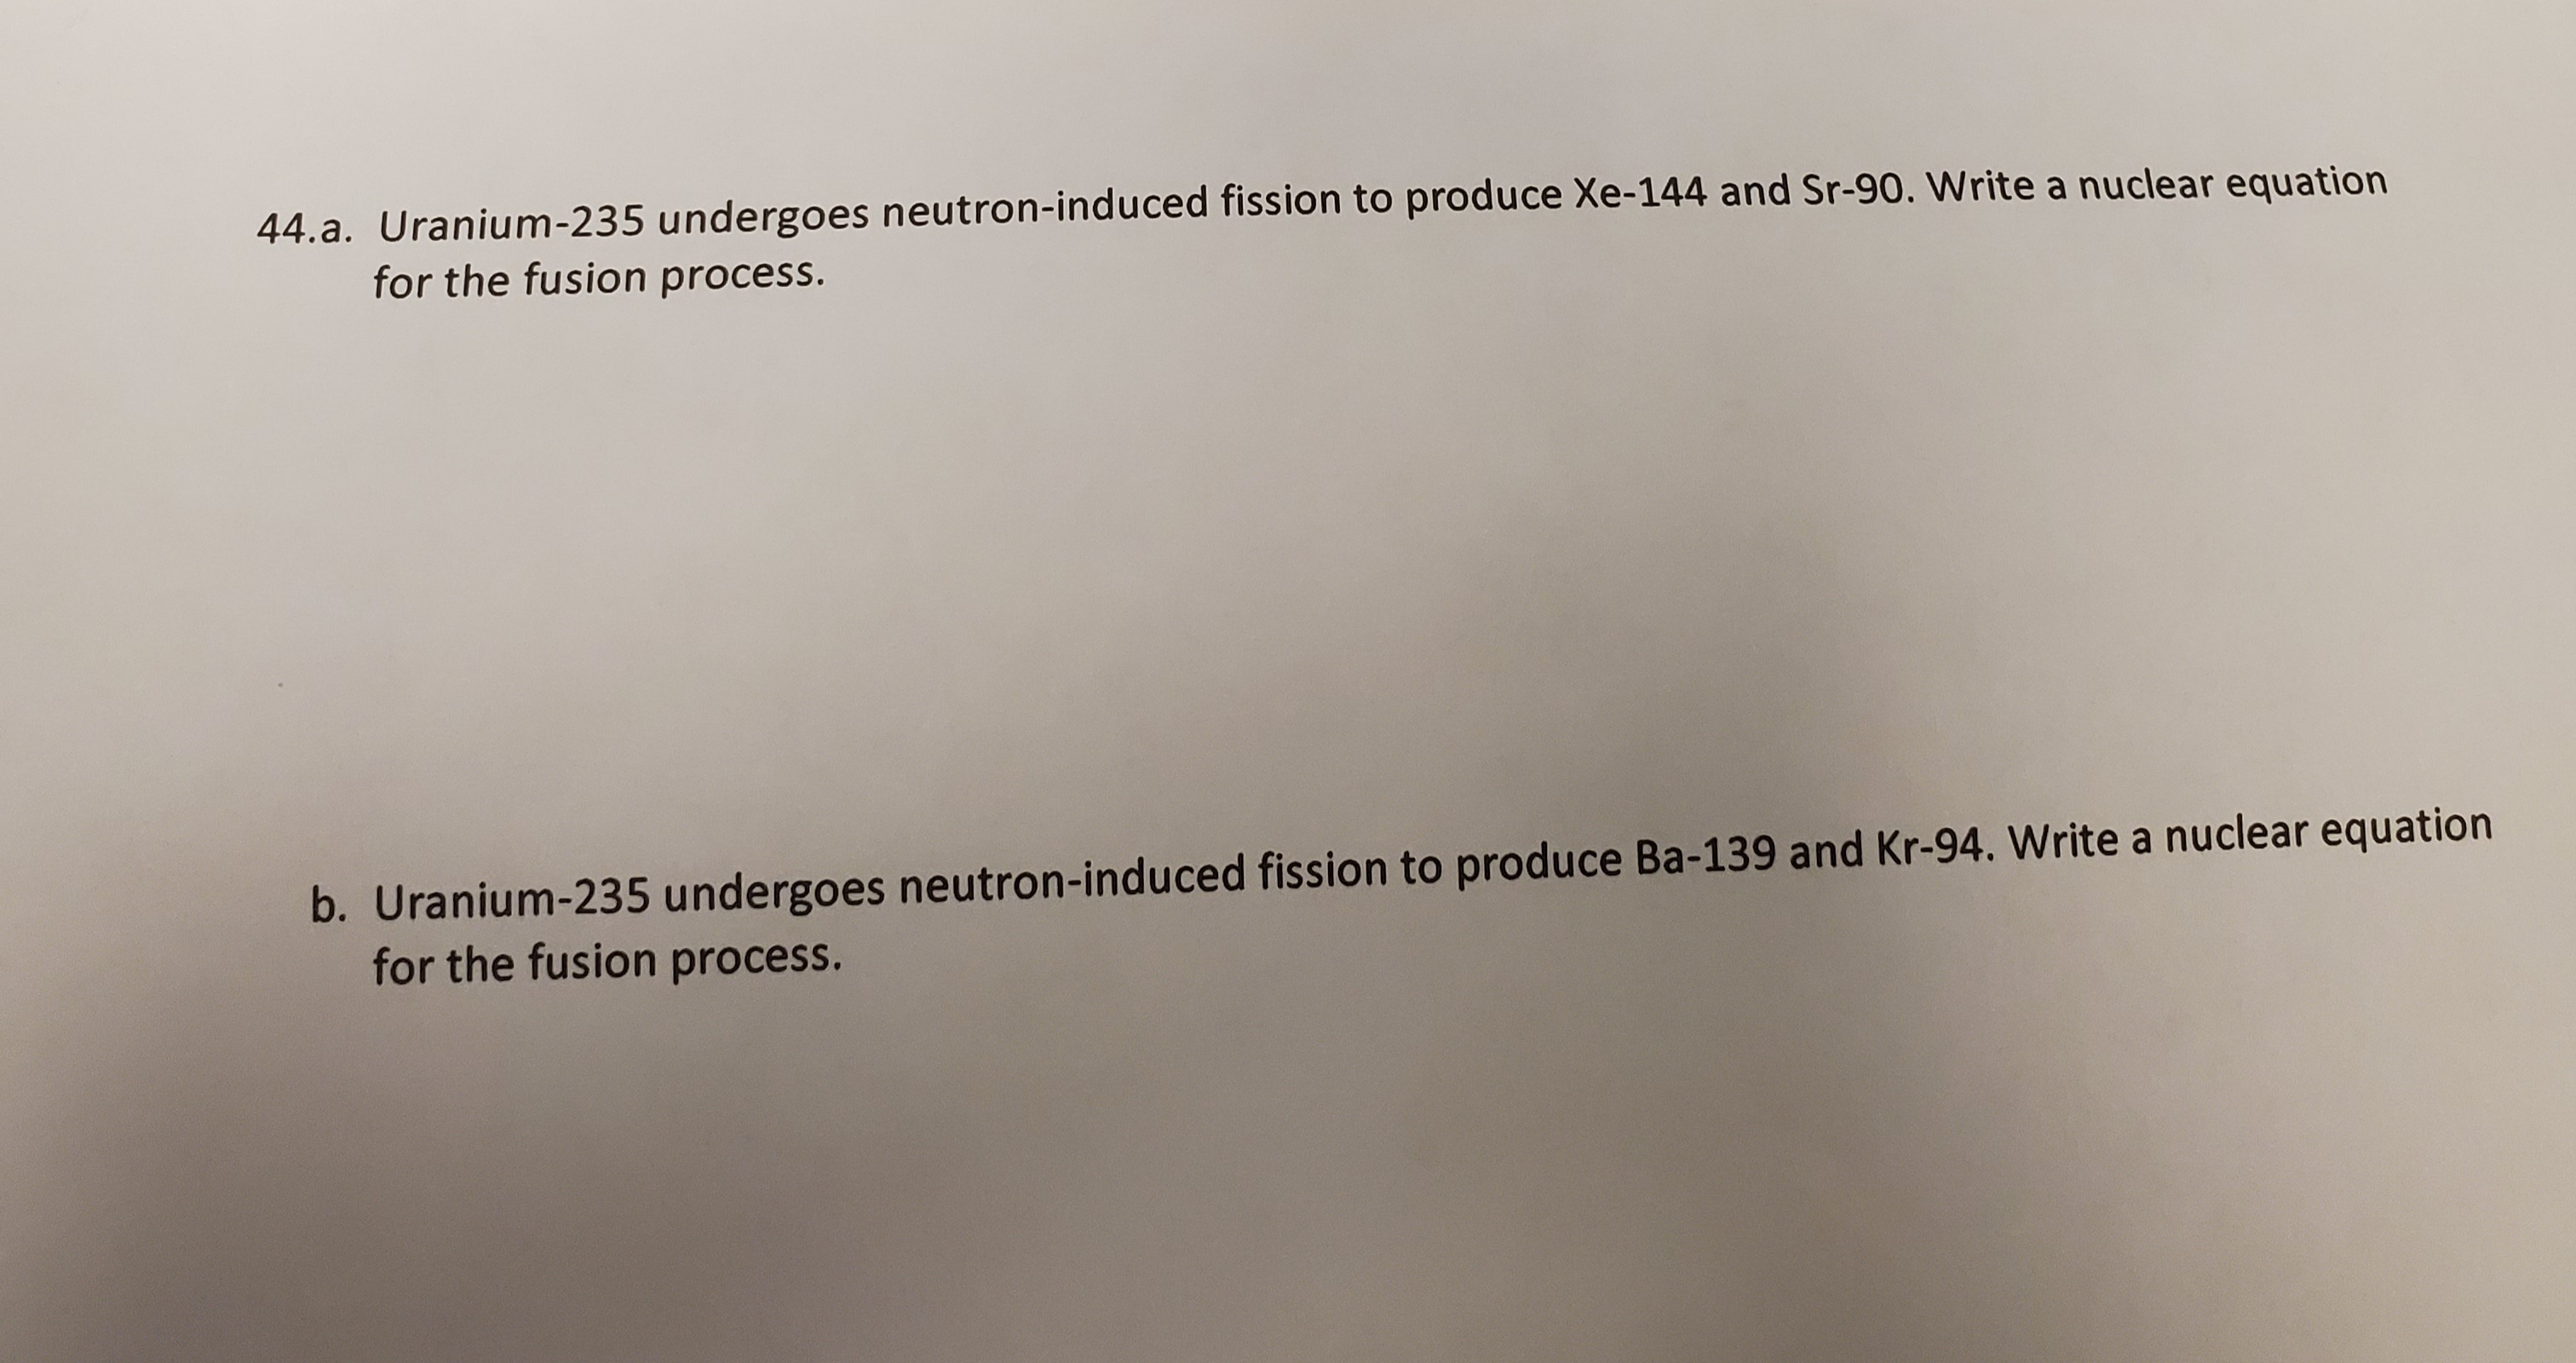 44.a. Uranium-235 undergoes neutron-induced fission to produce Xe-144 and Sr-90. Write a nuclear equation
for the fusion process.
b. Uranium-235 undergoes neutron-induced fission to produce Ba-139 and Kr-94. Write a nuclear equation
for the fusion process.
